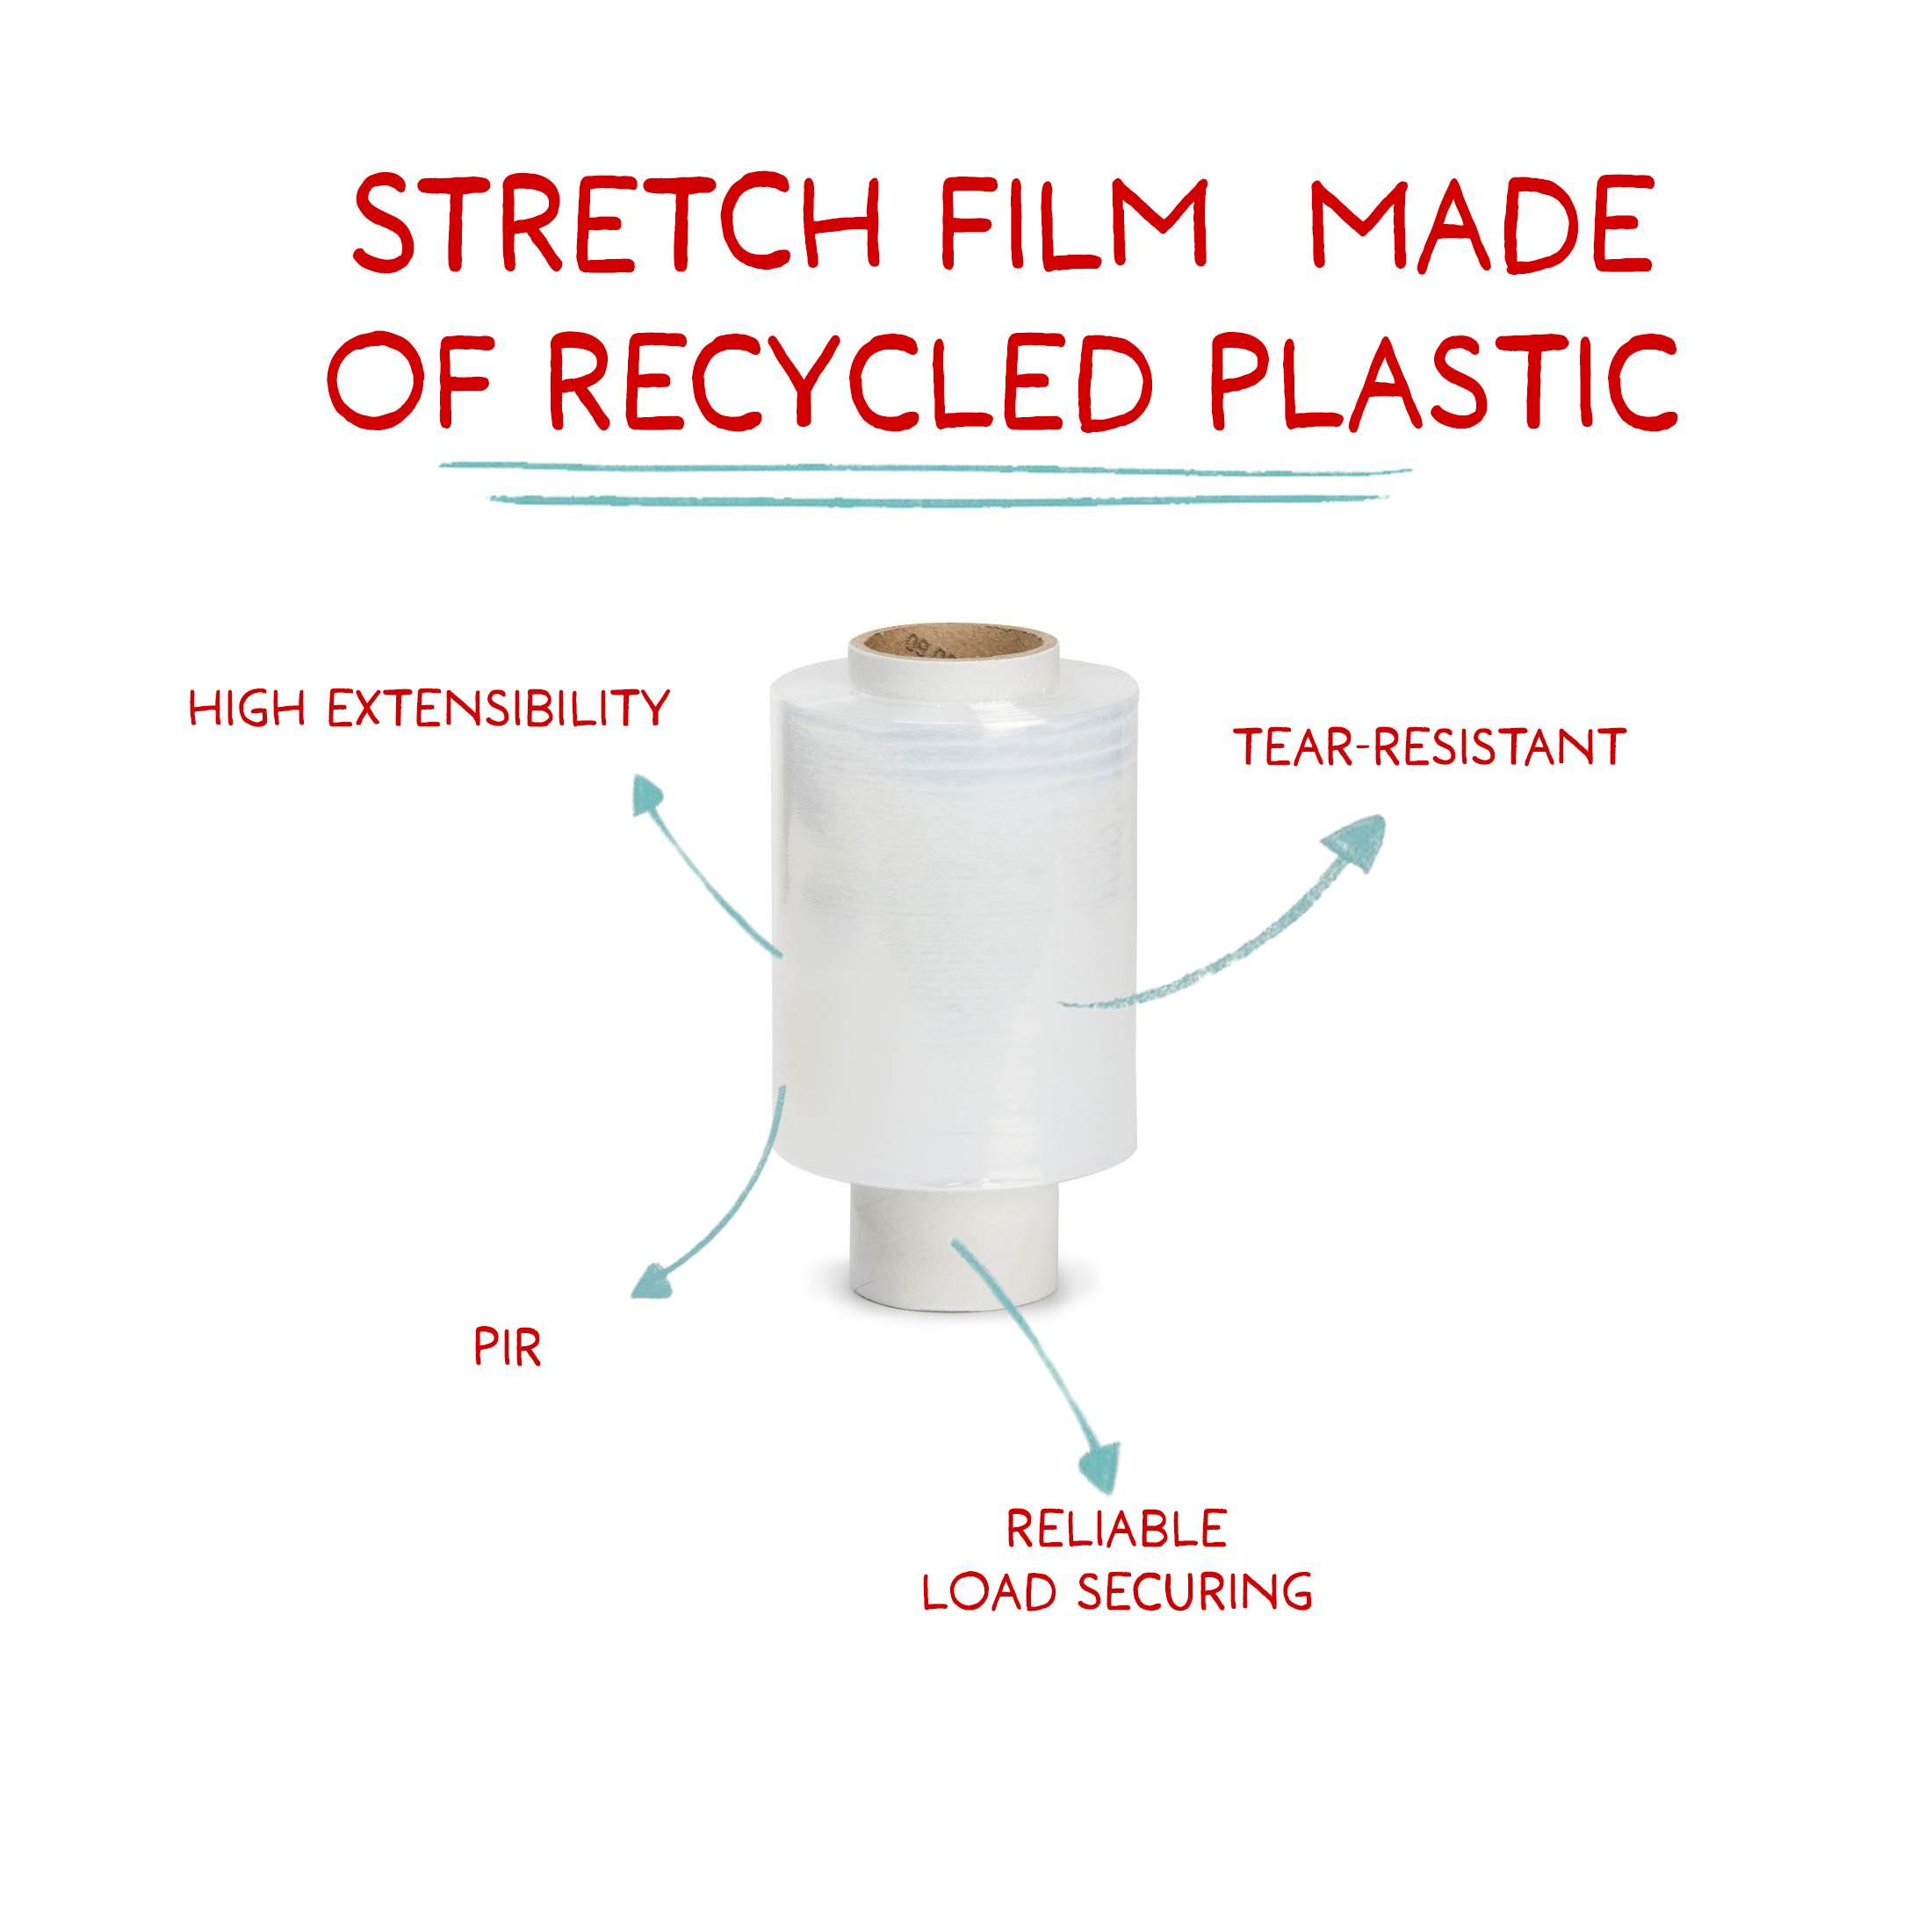 Stretch film made of used plastic